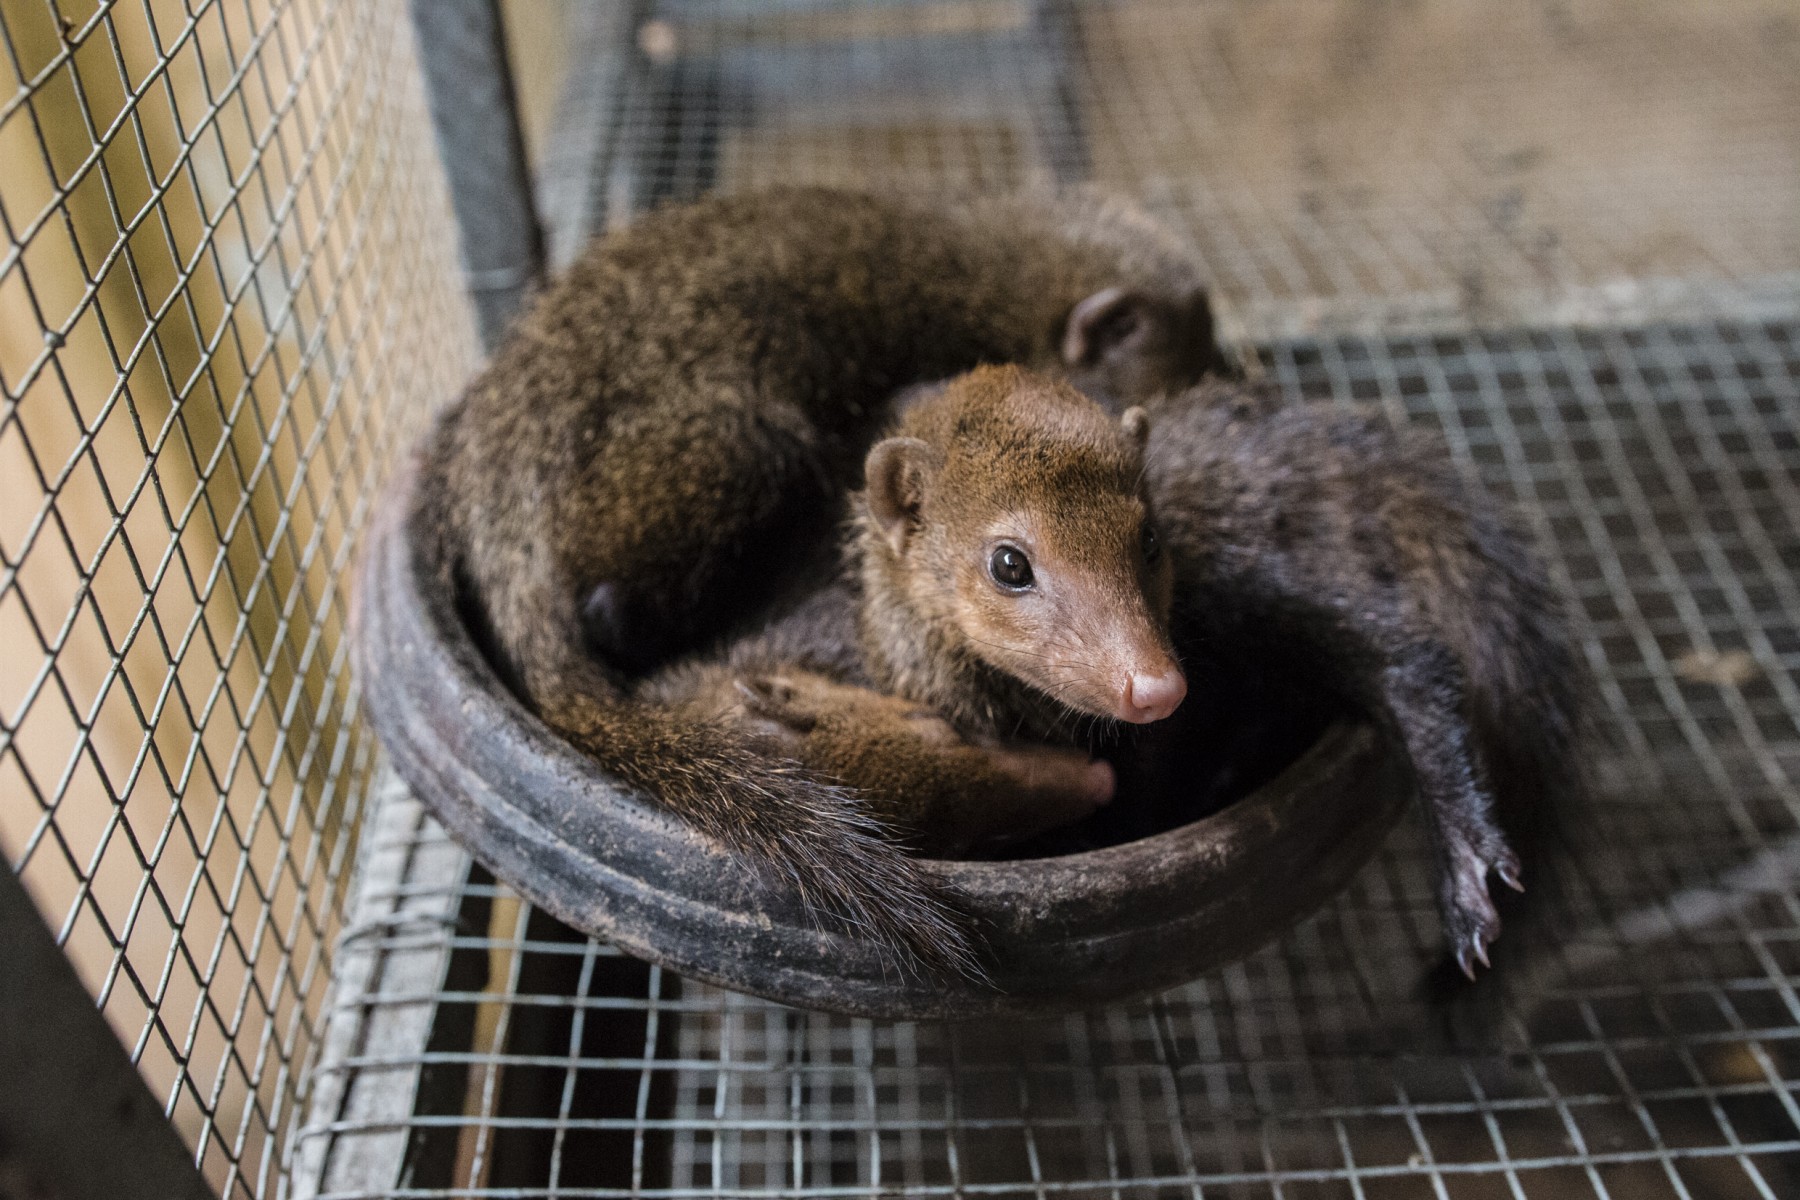 Images of animals in shipping crates provides evidence that Egyptian mongooses were exported via Ethiopian Airlines.